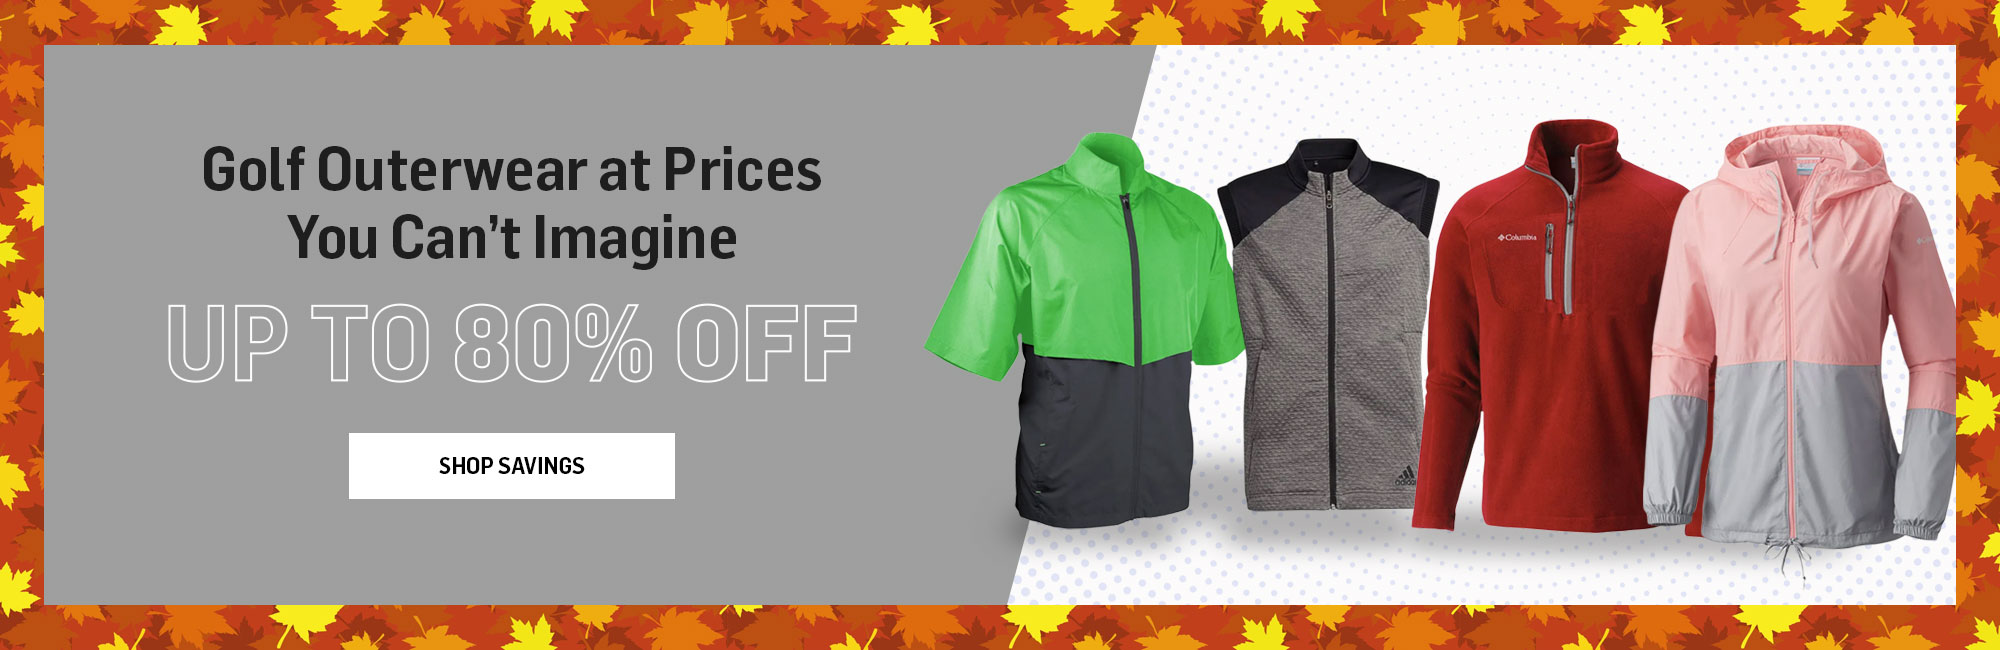 Golf Outerwear at Prices You Can't Imagine